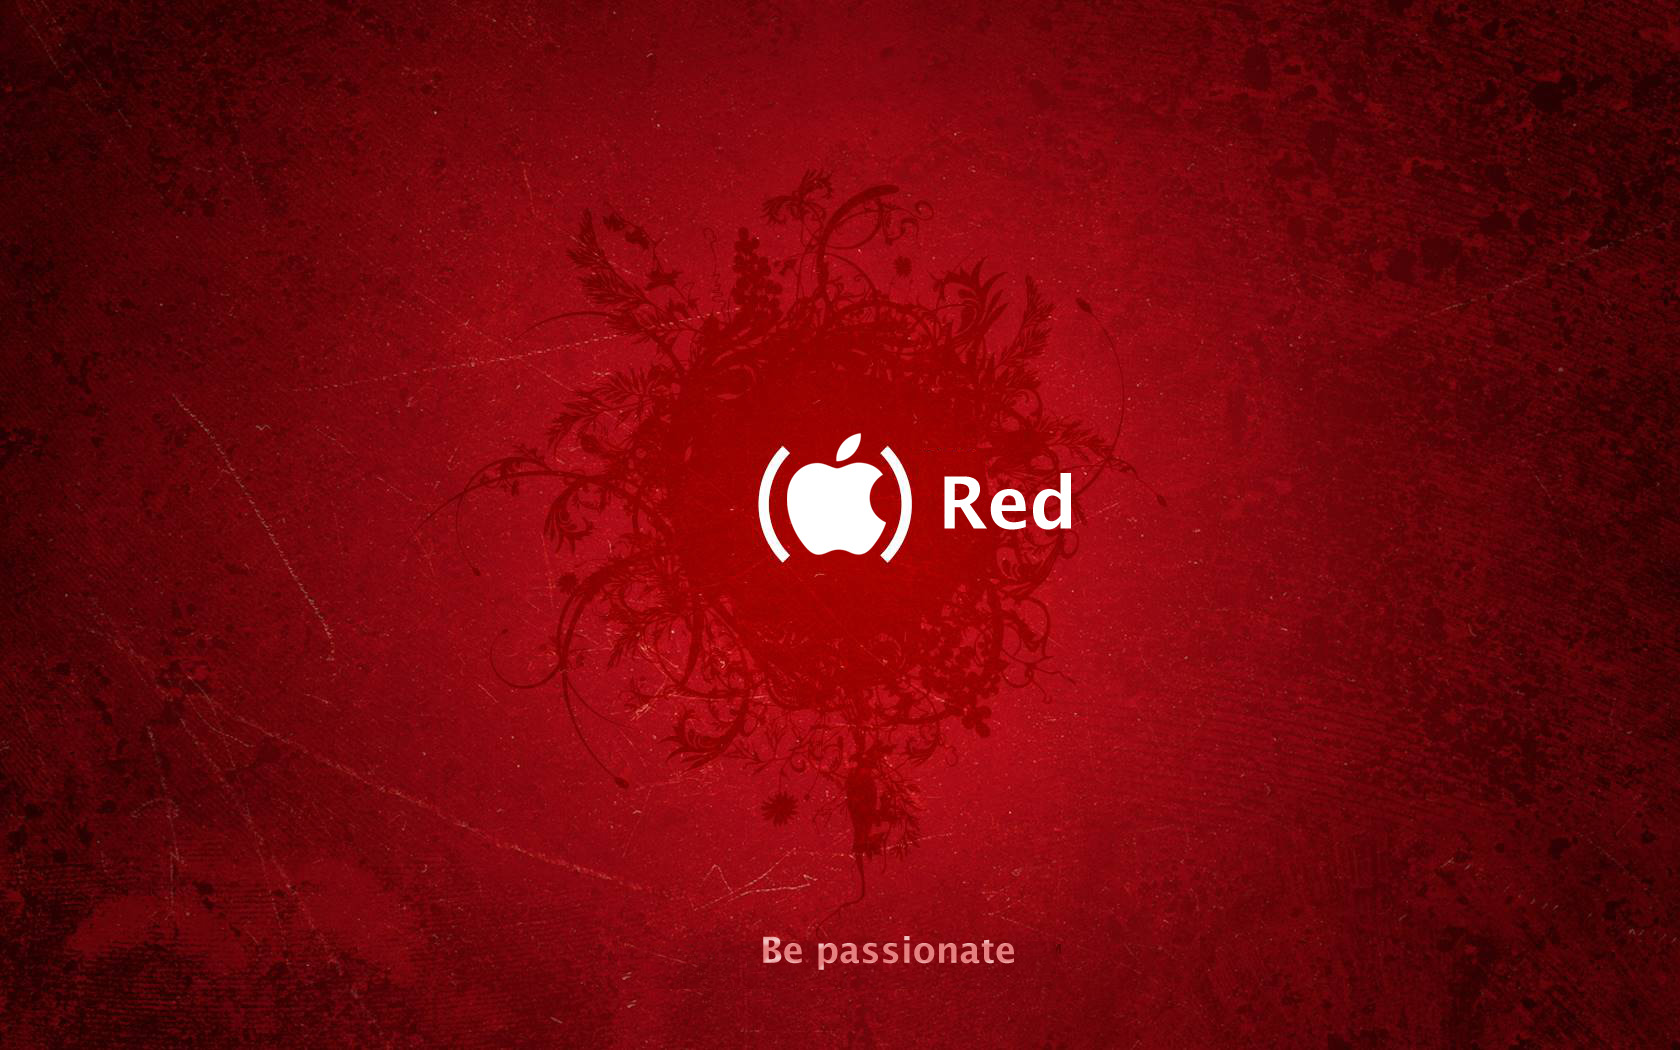 Red Apple HD Wallpapers   First HD Wallpapers